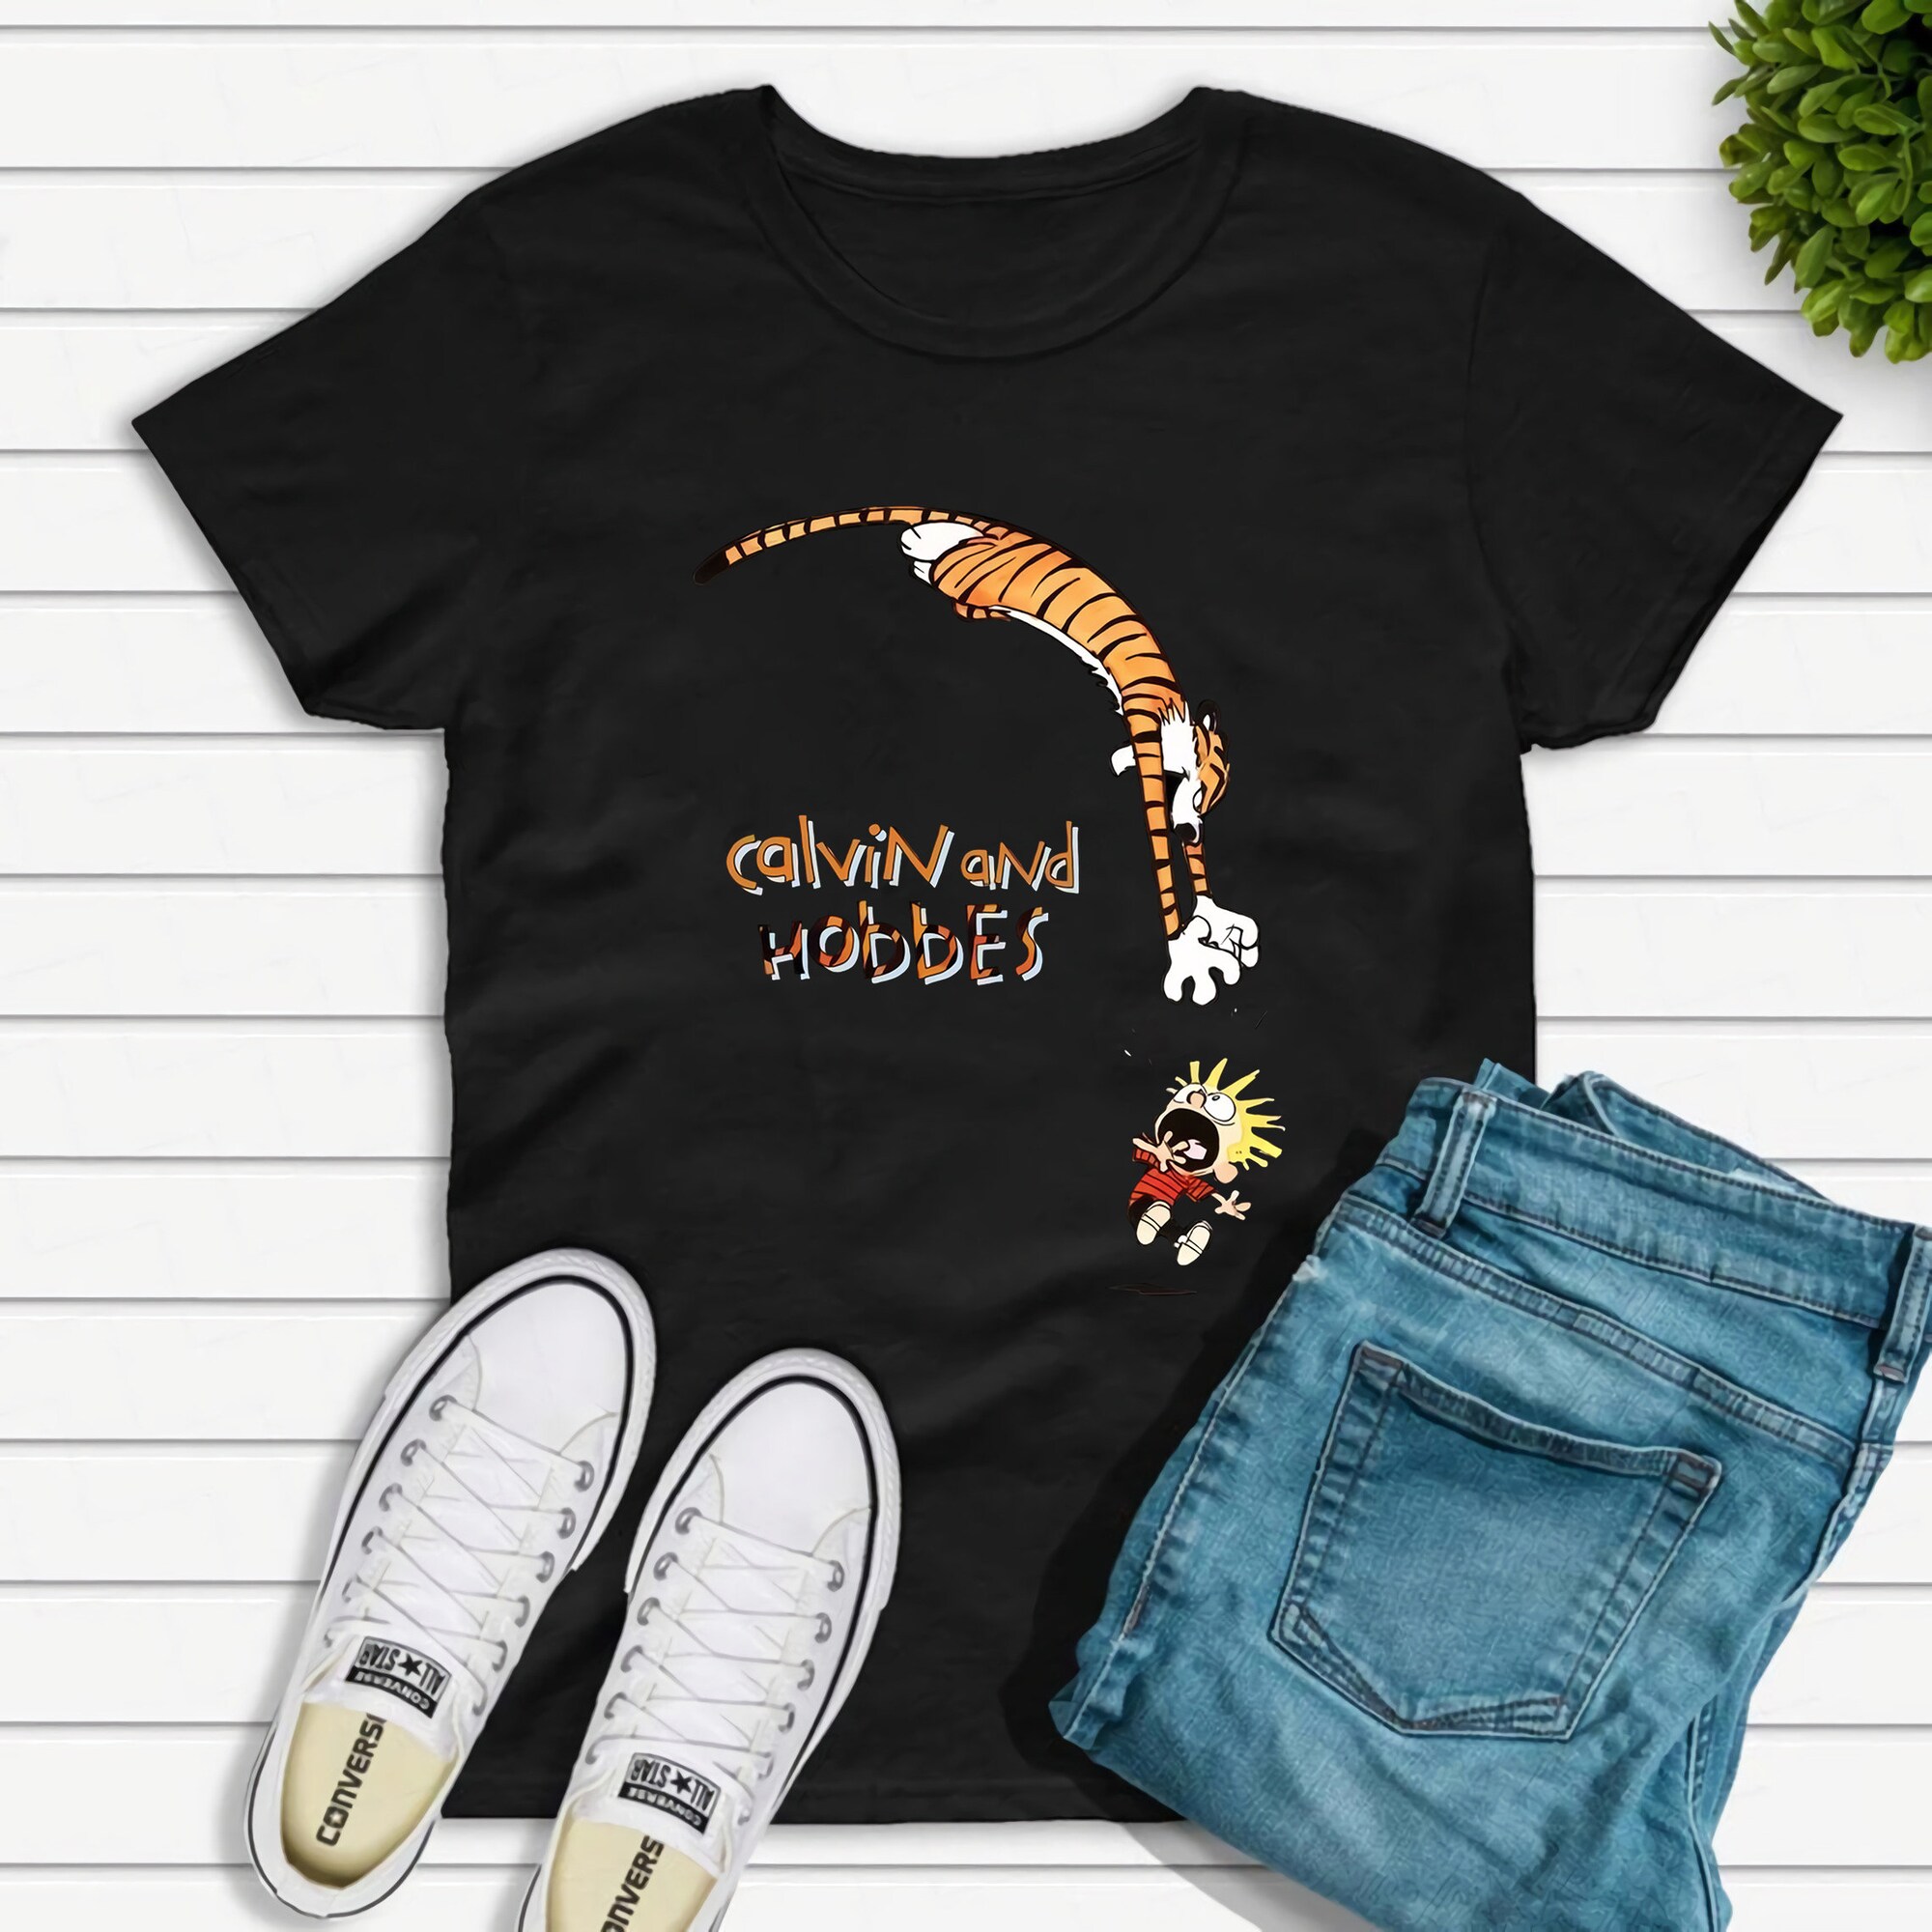 Discover Calvin And Hobbes Funny T-Shirt, Calvin And Hobbes Shirt Fan Gift, Calvin And Hobbes Vintage Shirt